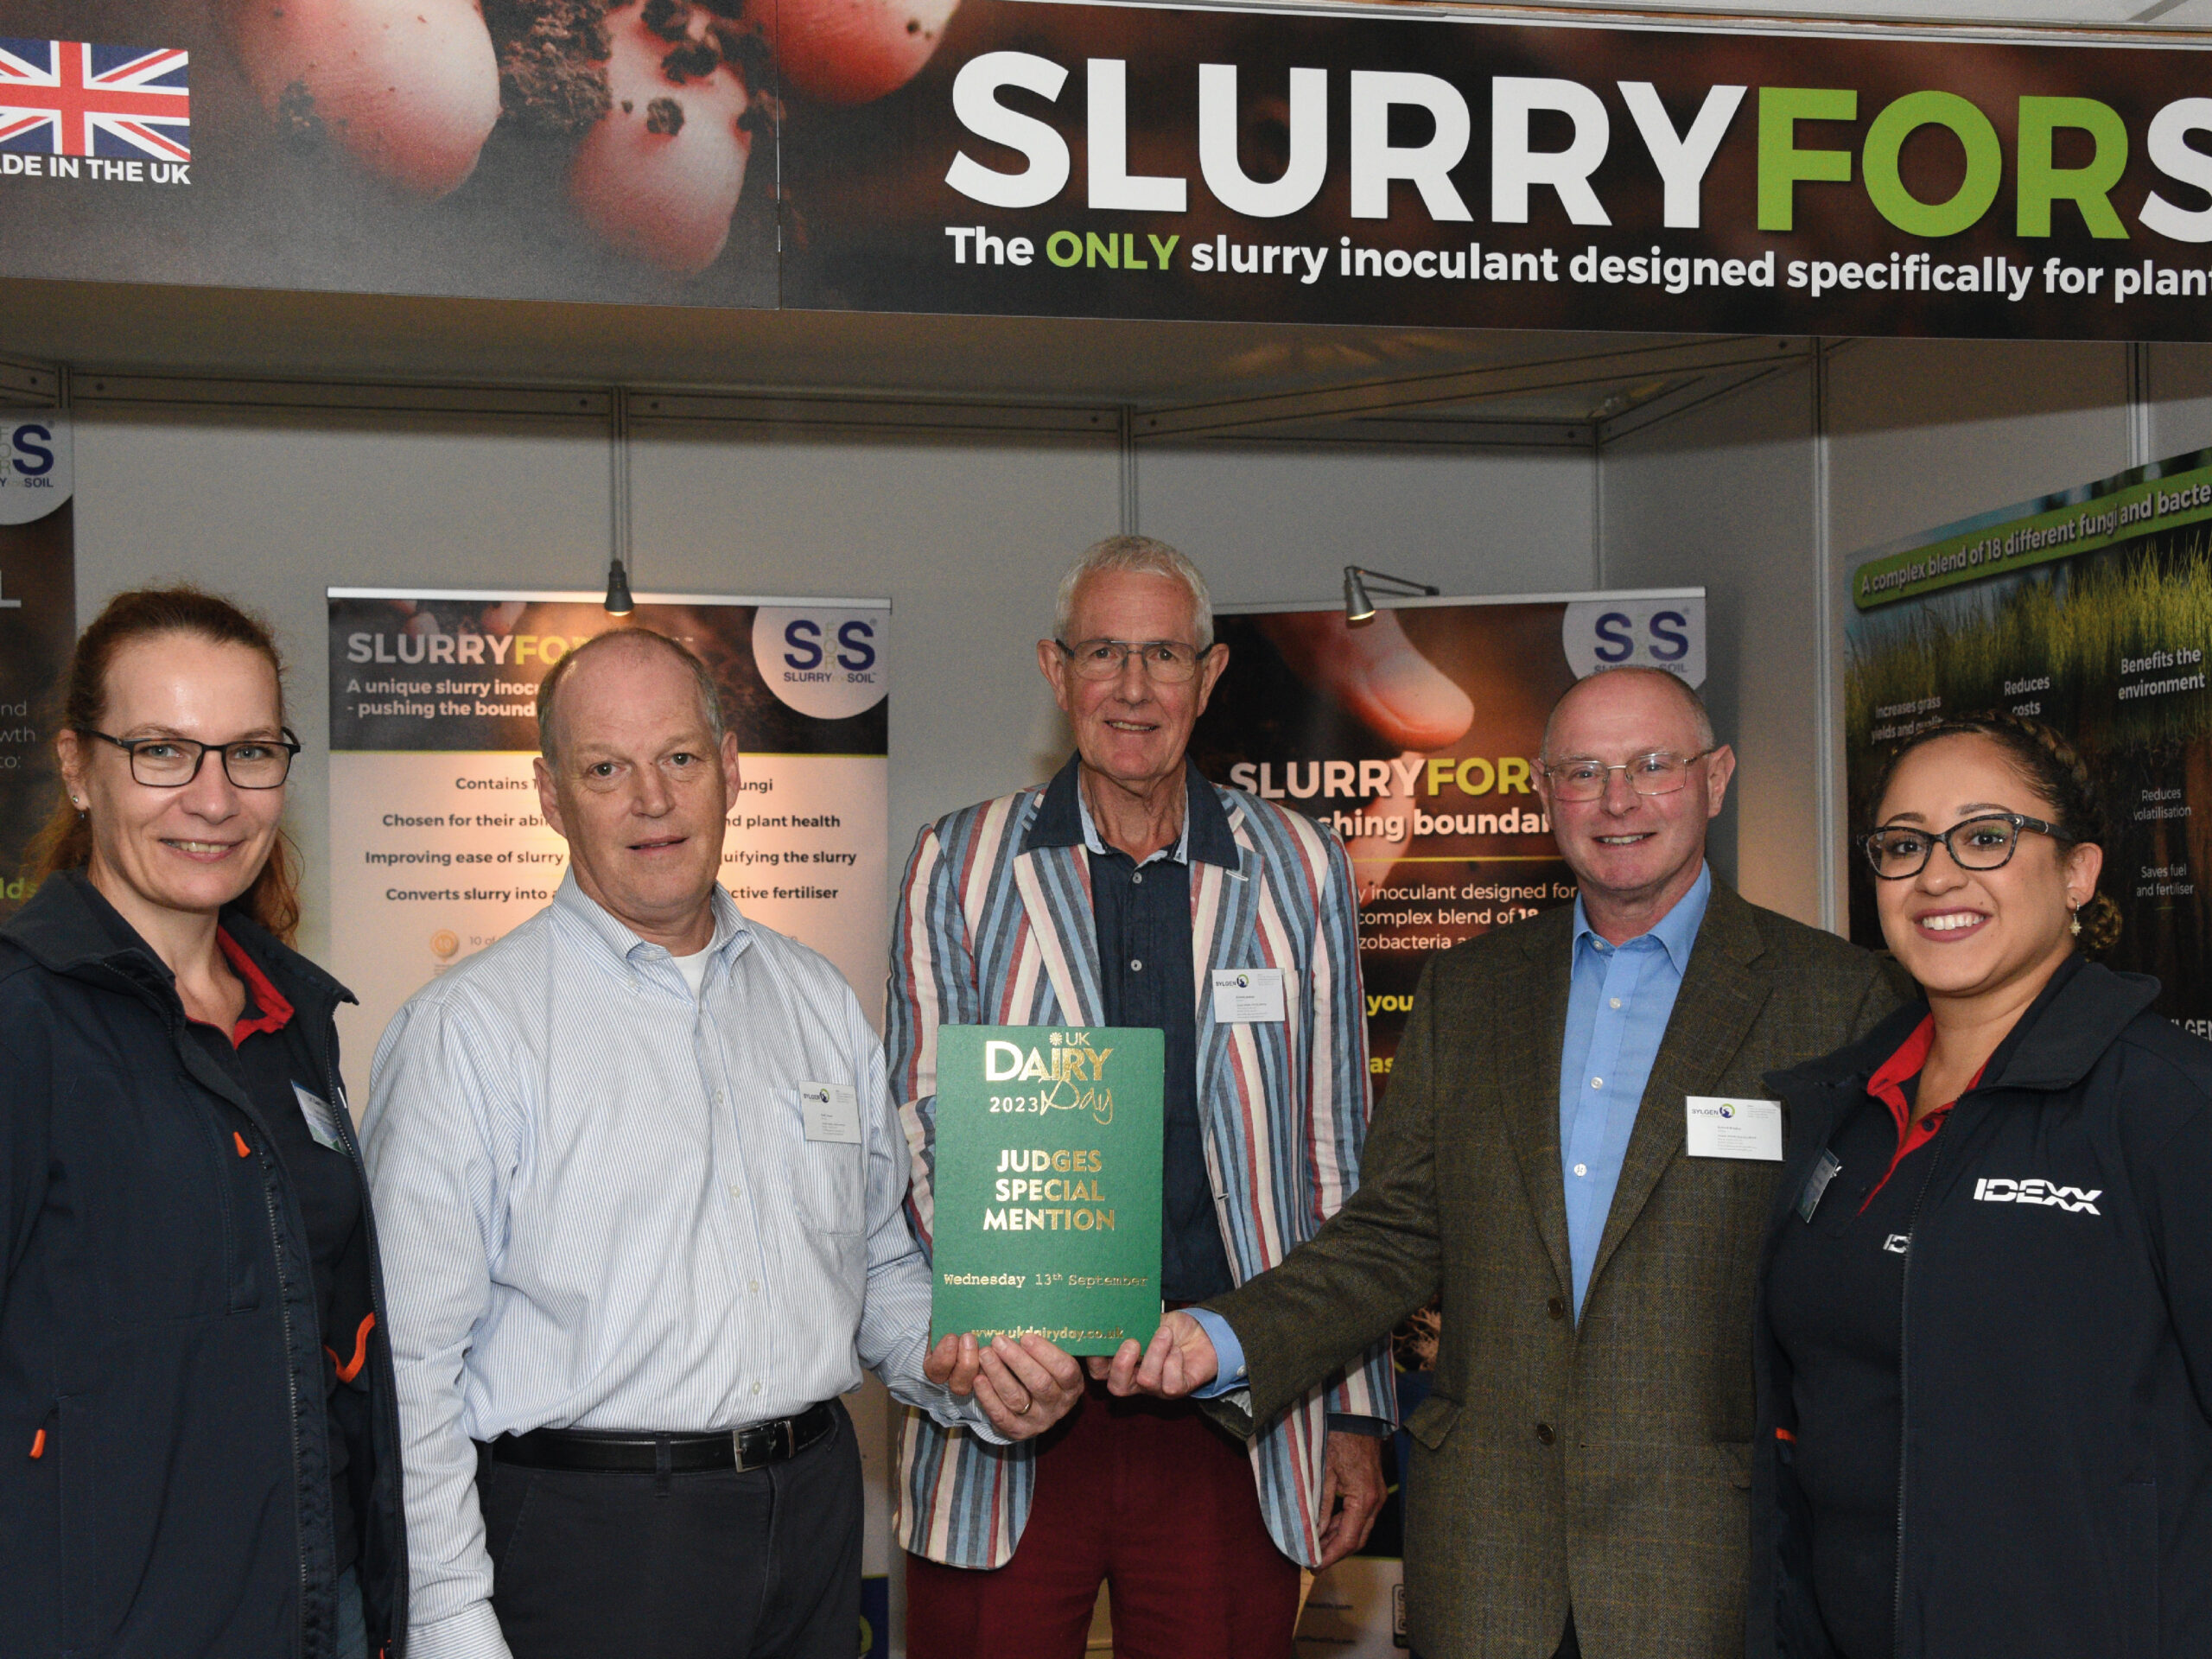 Directors of Slygen Animal Health receiving certificate of Judges' Special Mention at the stand at UK Dairy Day 2023.